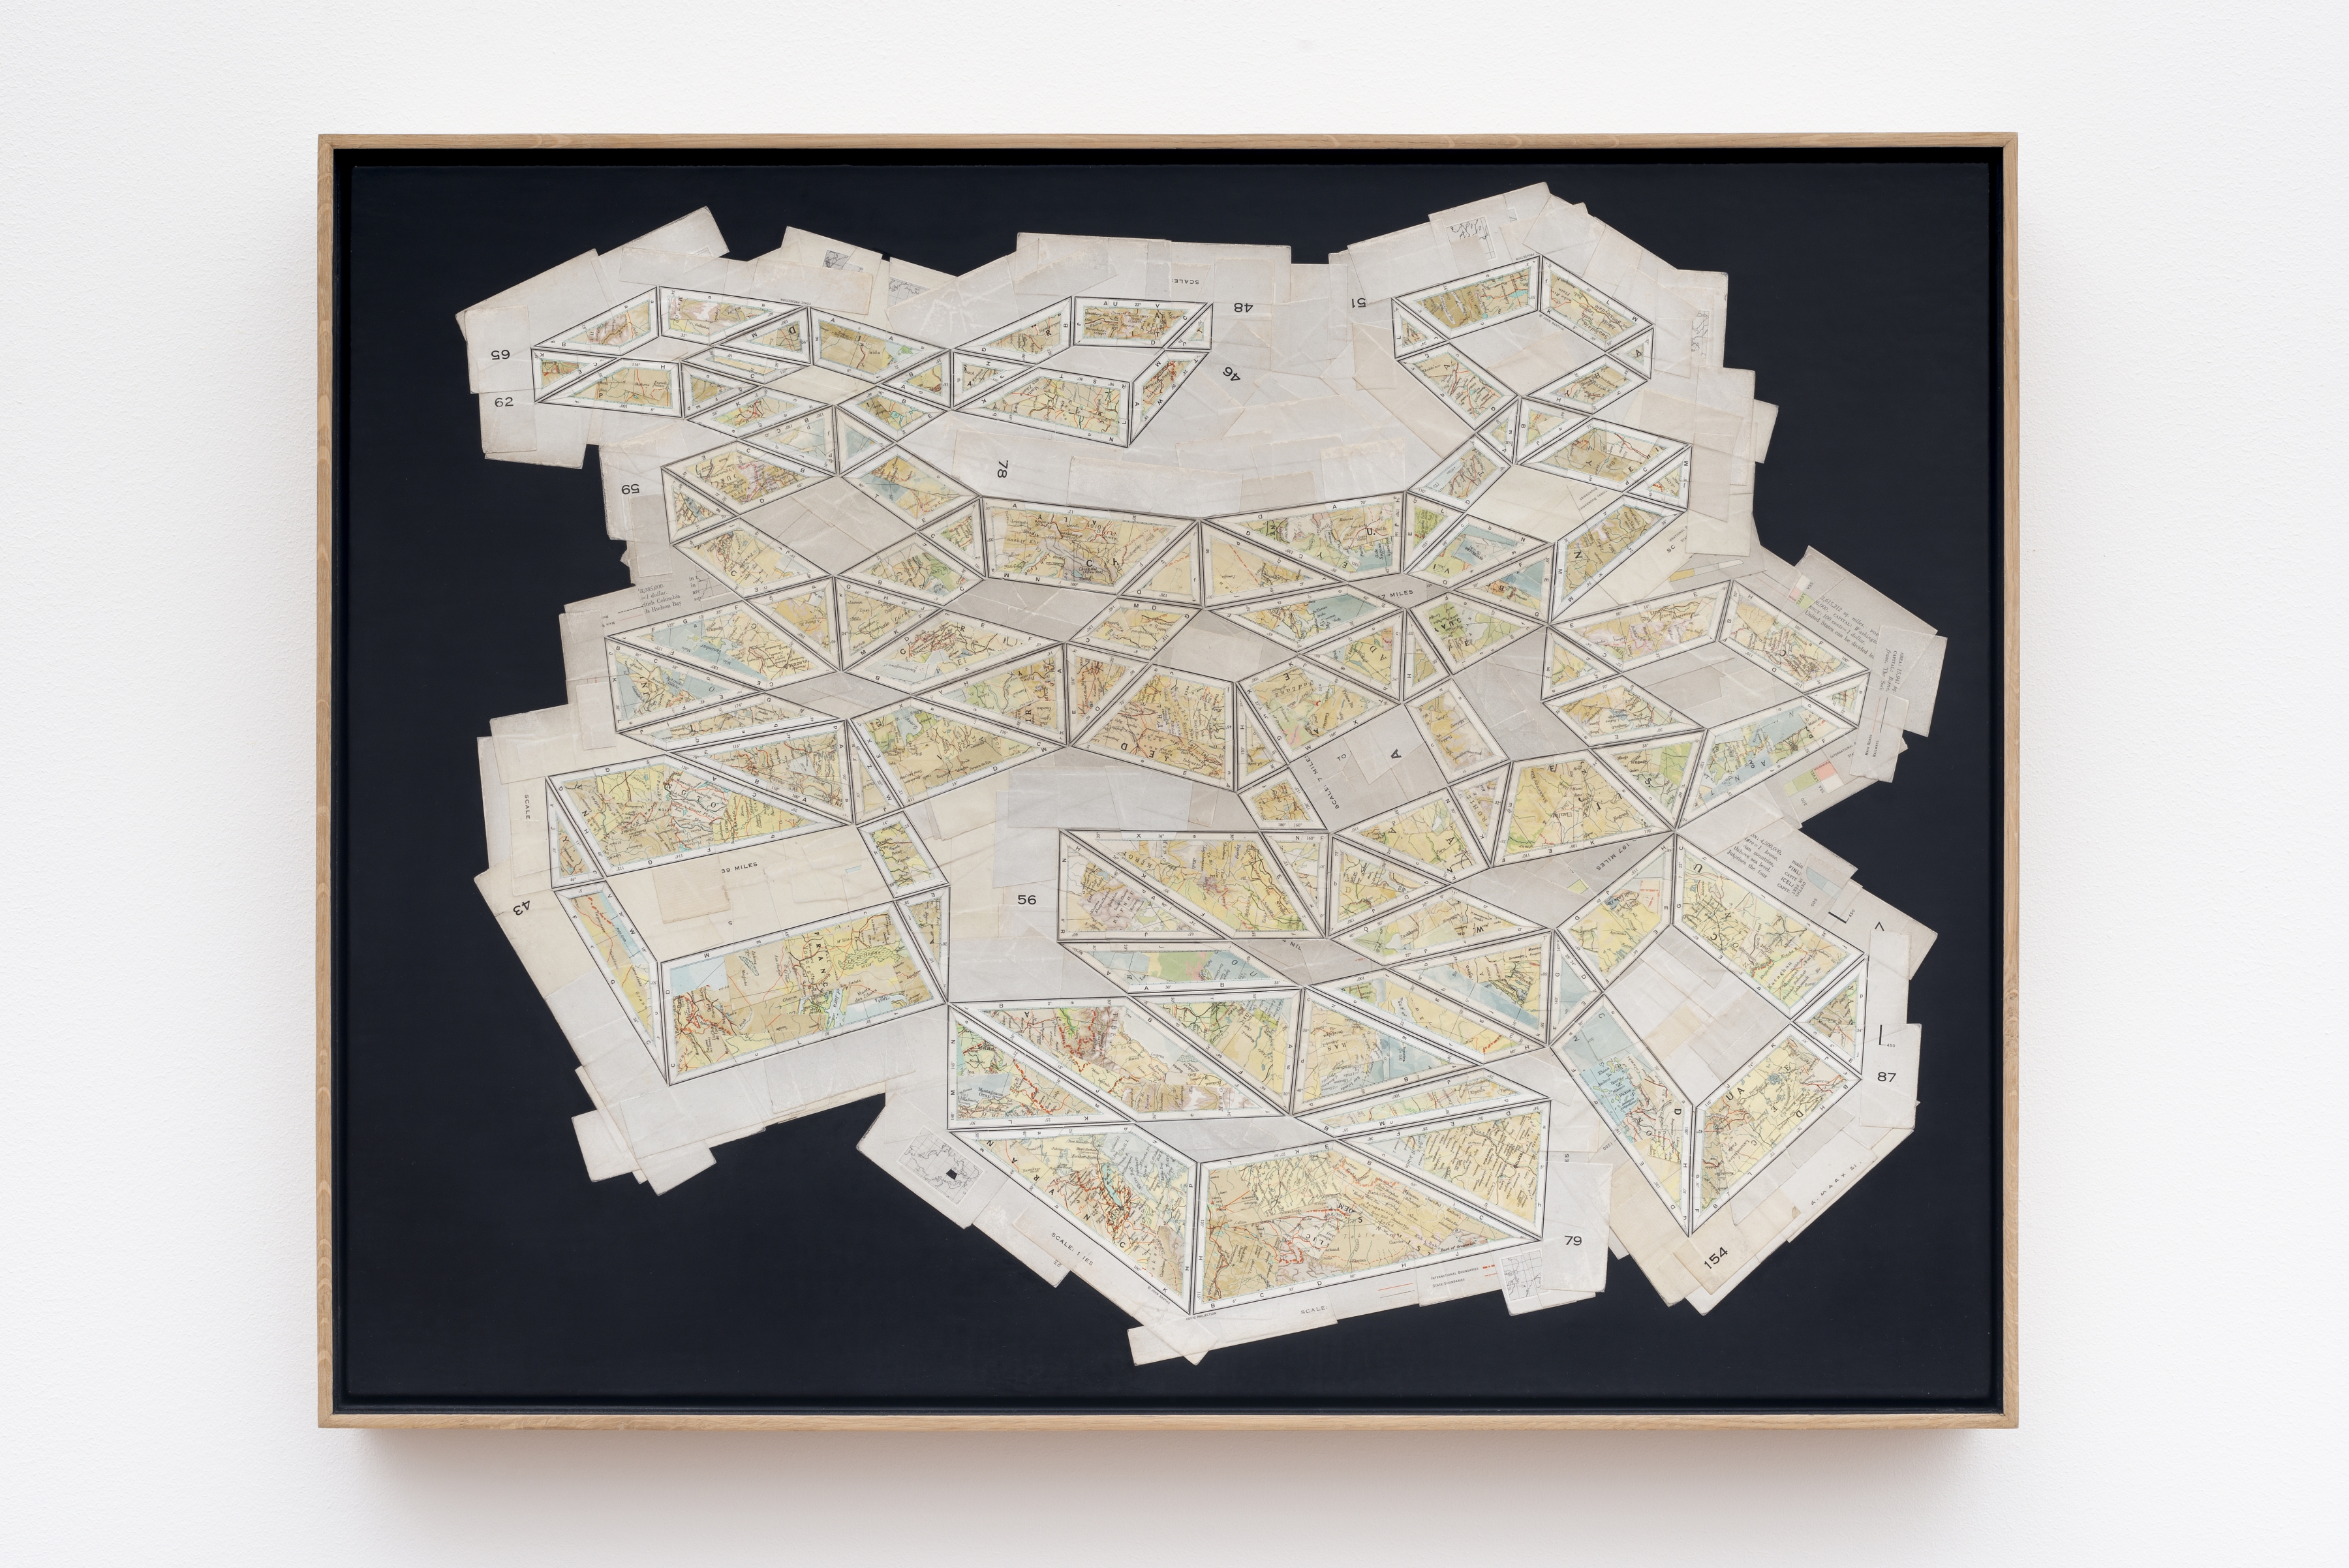 Hinged Expanse, 2021
Reconfigured map fragments on canvas

63 x 83 x 7.5 cm / 24.8 x 32.7 x 3 in.

Enquire